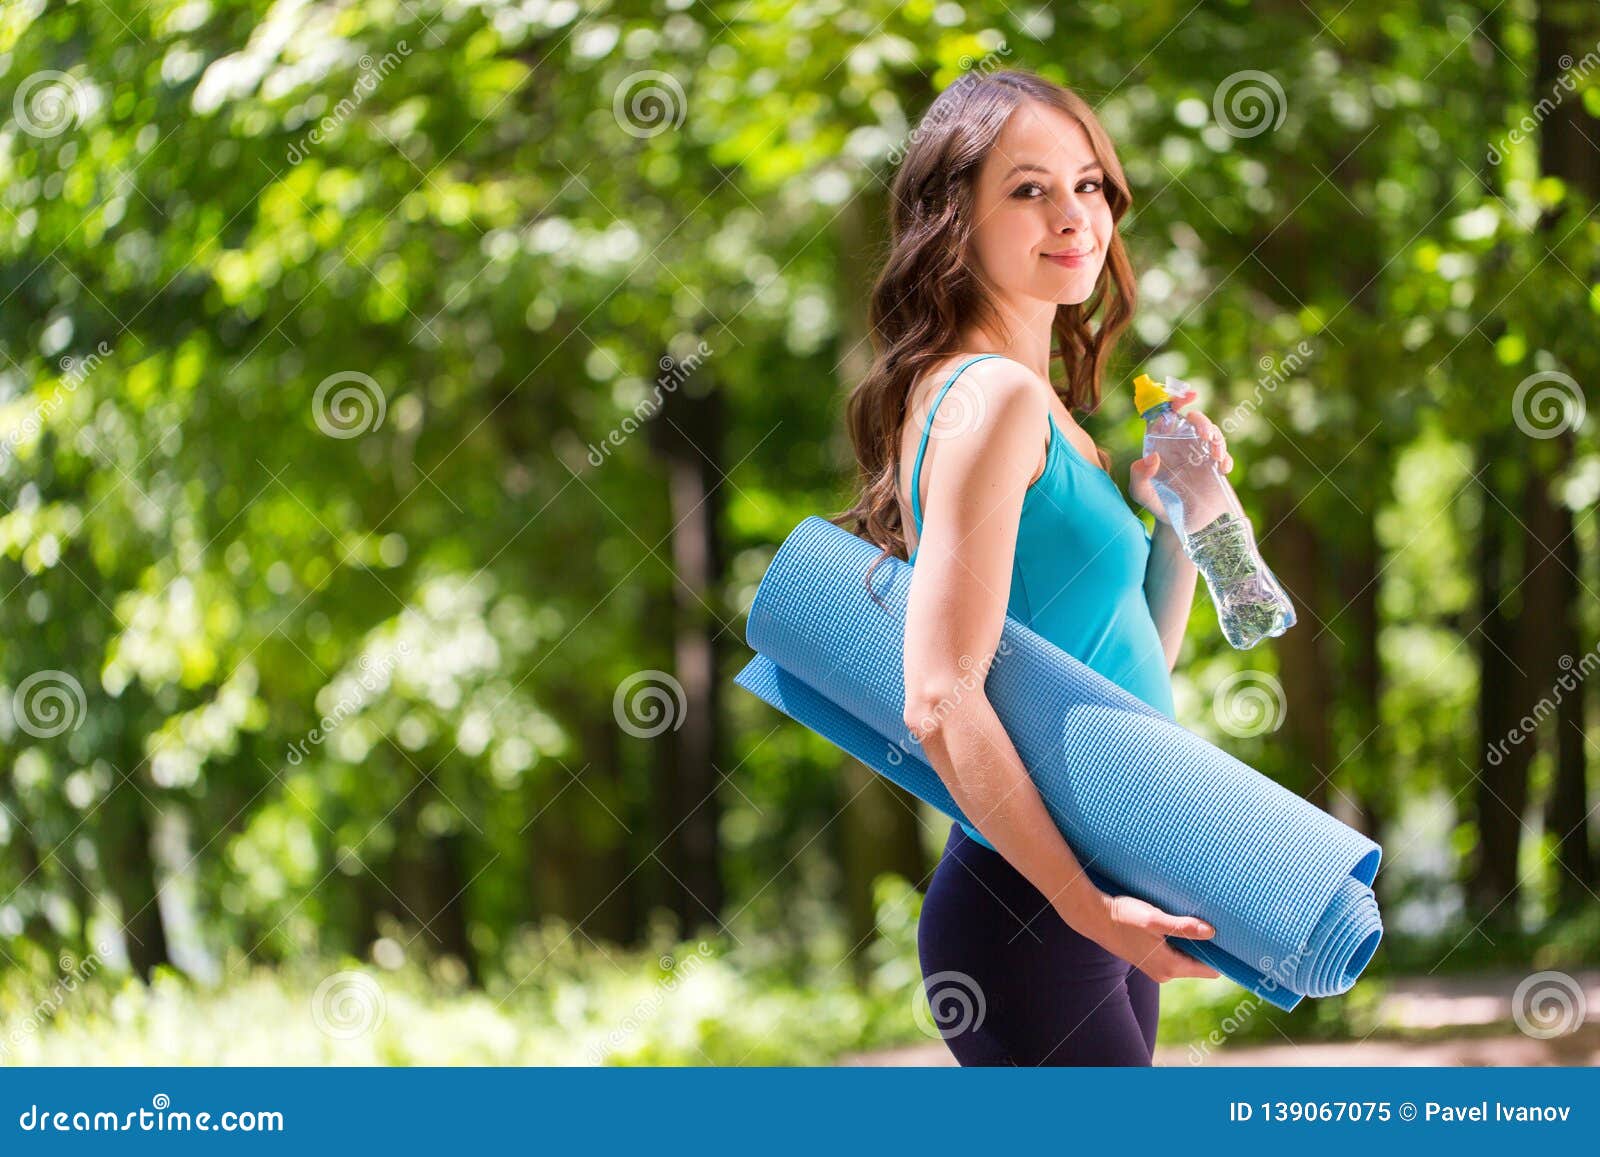 Beautiful Woman with a Yoga Mat Outdoors Stock Image - Image of girl ...